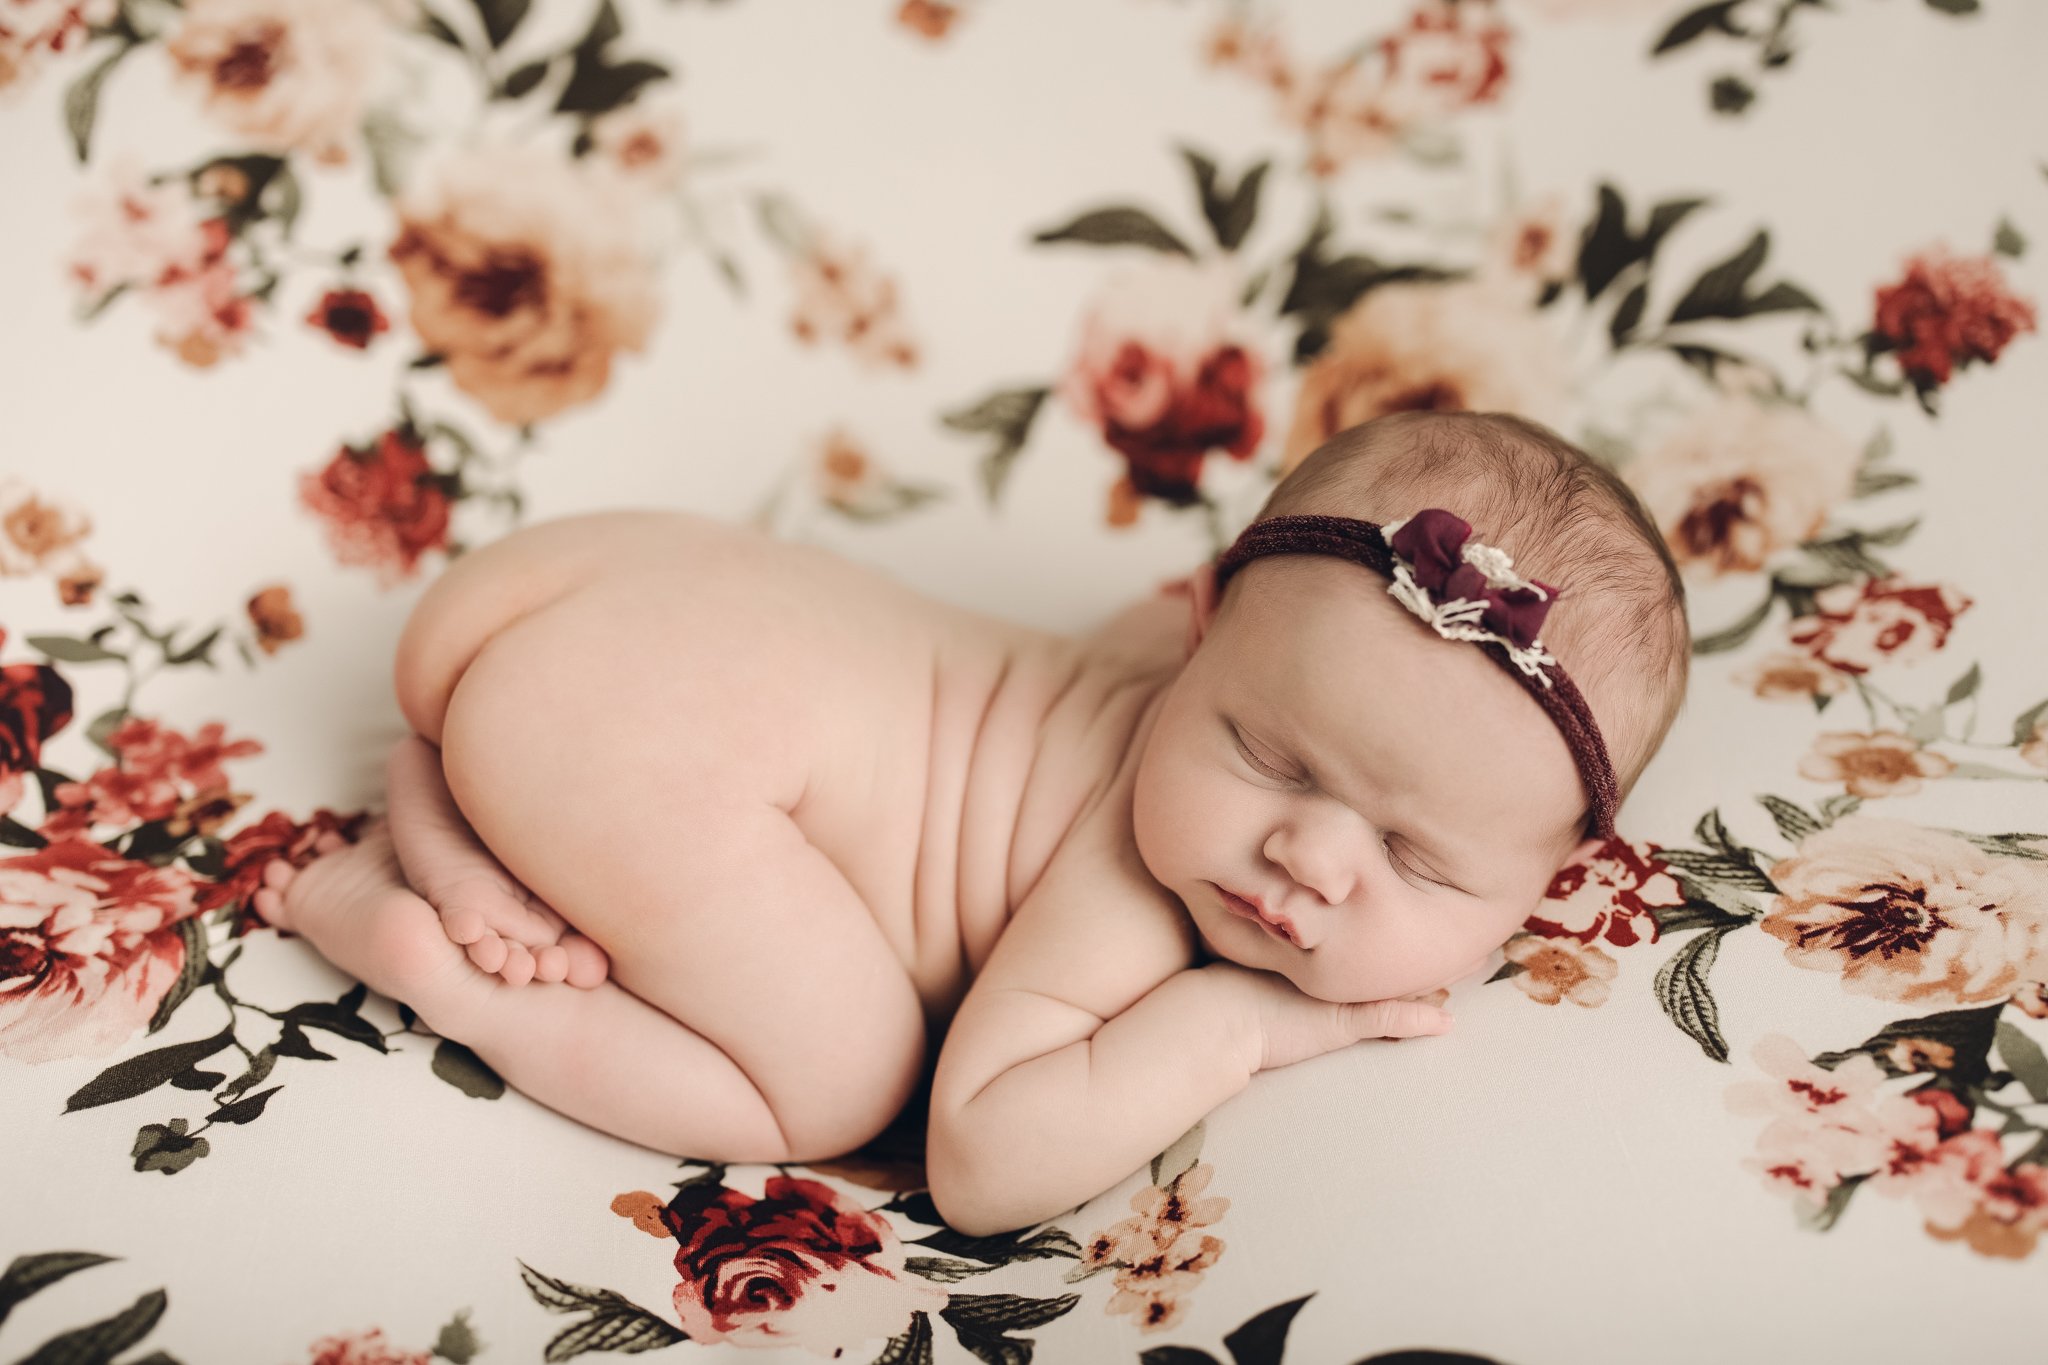 Posed_Studio_Newborn_Photographer_Second_Child_Siblings_Baby_Girl_Pink_Floral_by_Christie_Leigh_Photo_Champion_OH_Ohio_Trumbull_County-10.jpg